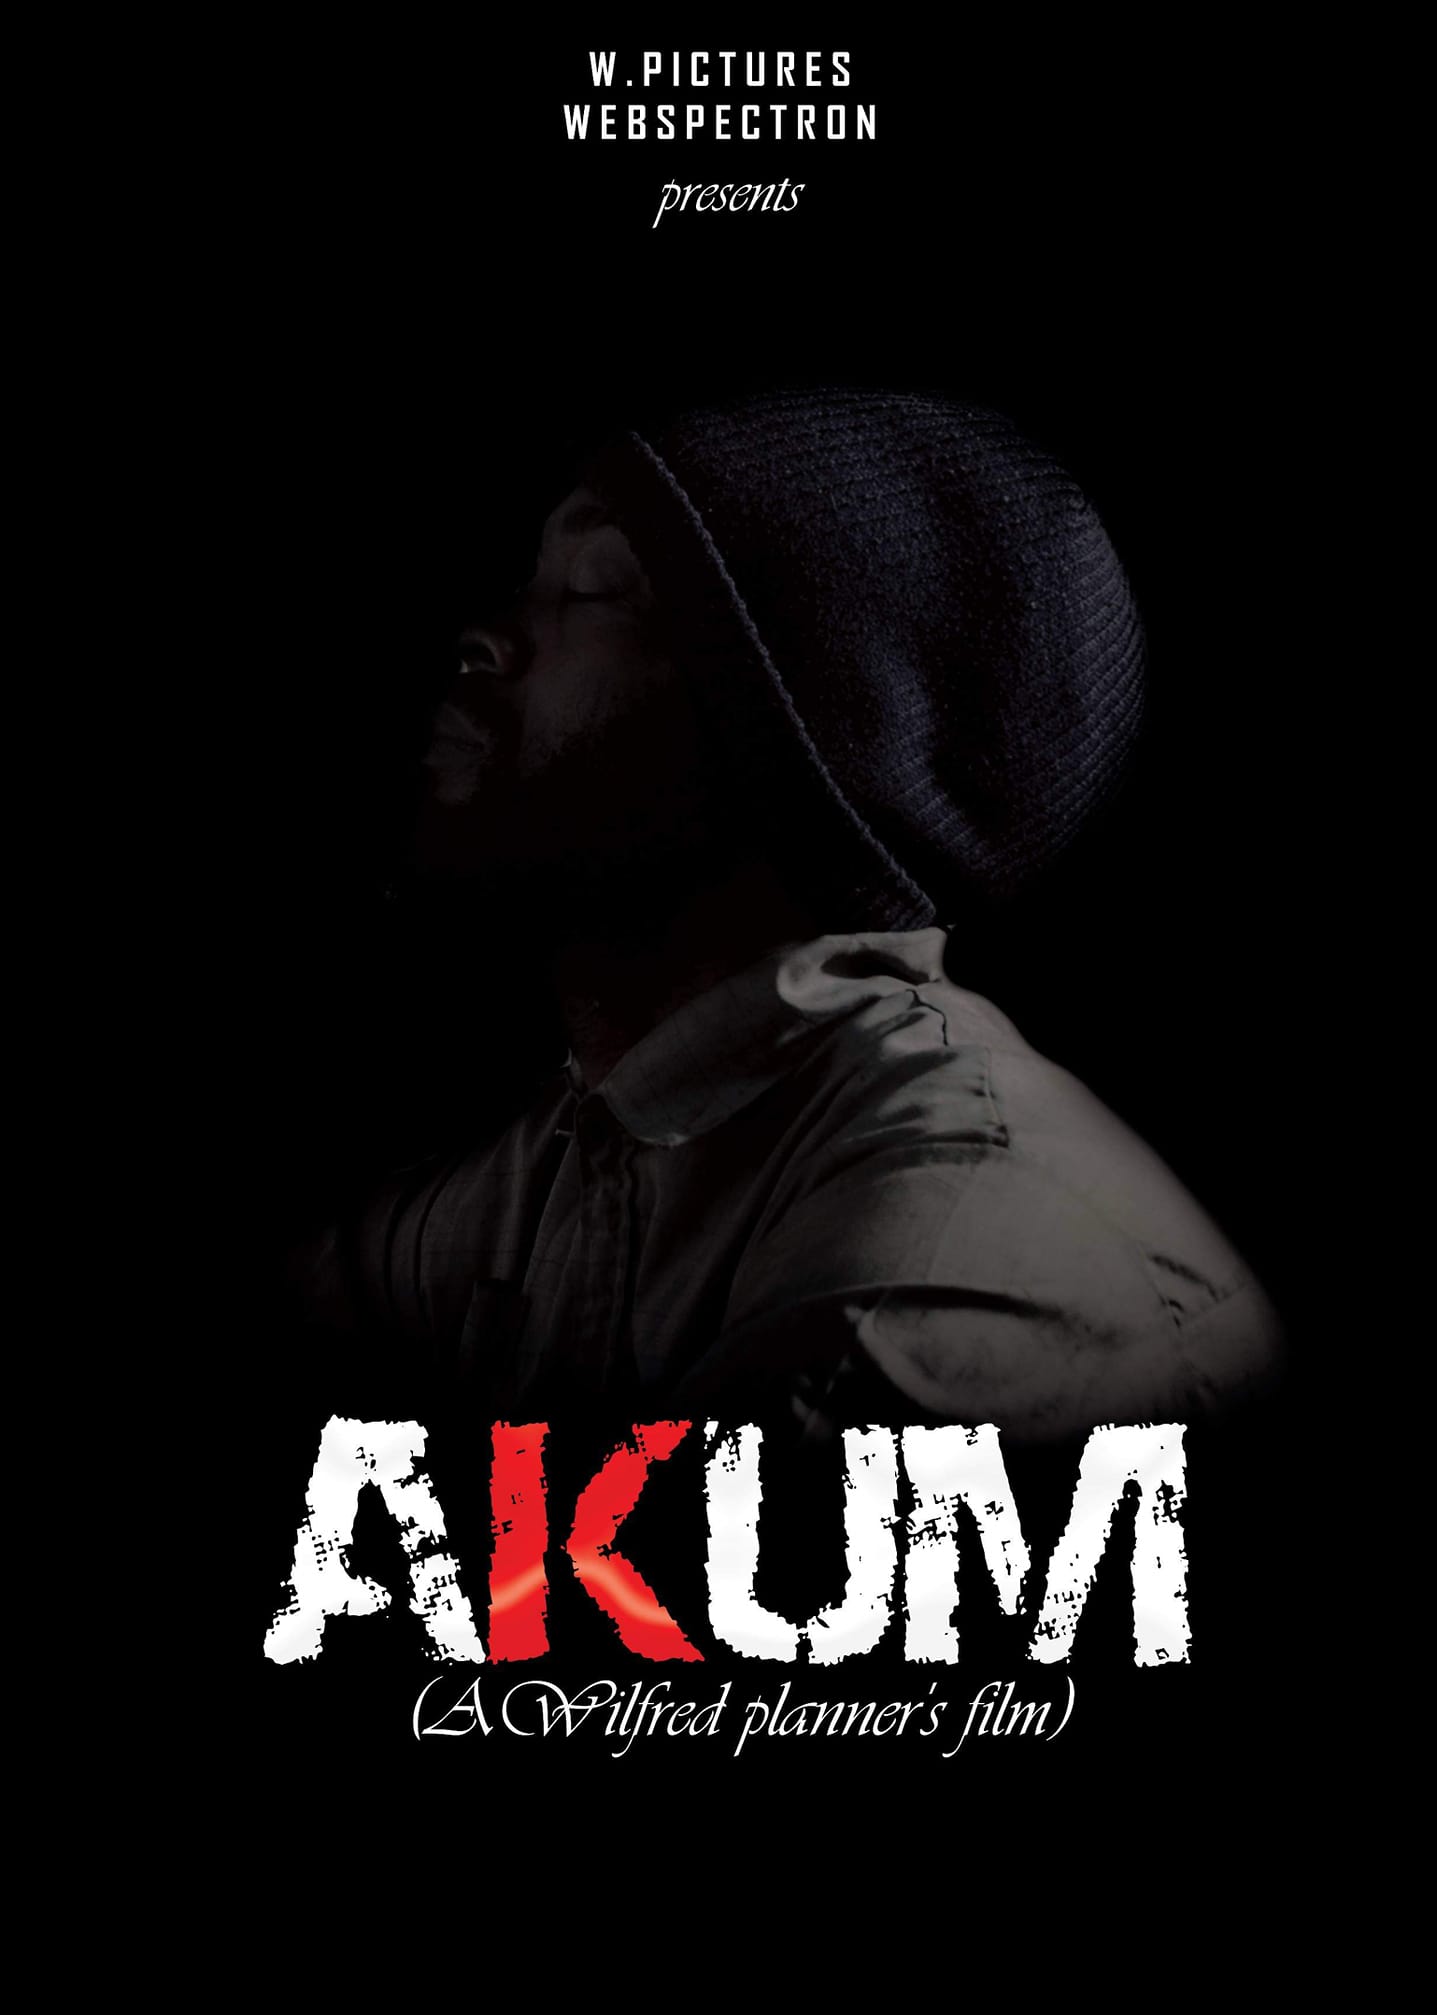 AKUM The Movie by W Pictures Studios in Collaboration with Webspectron